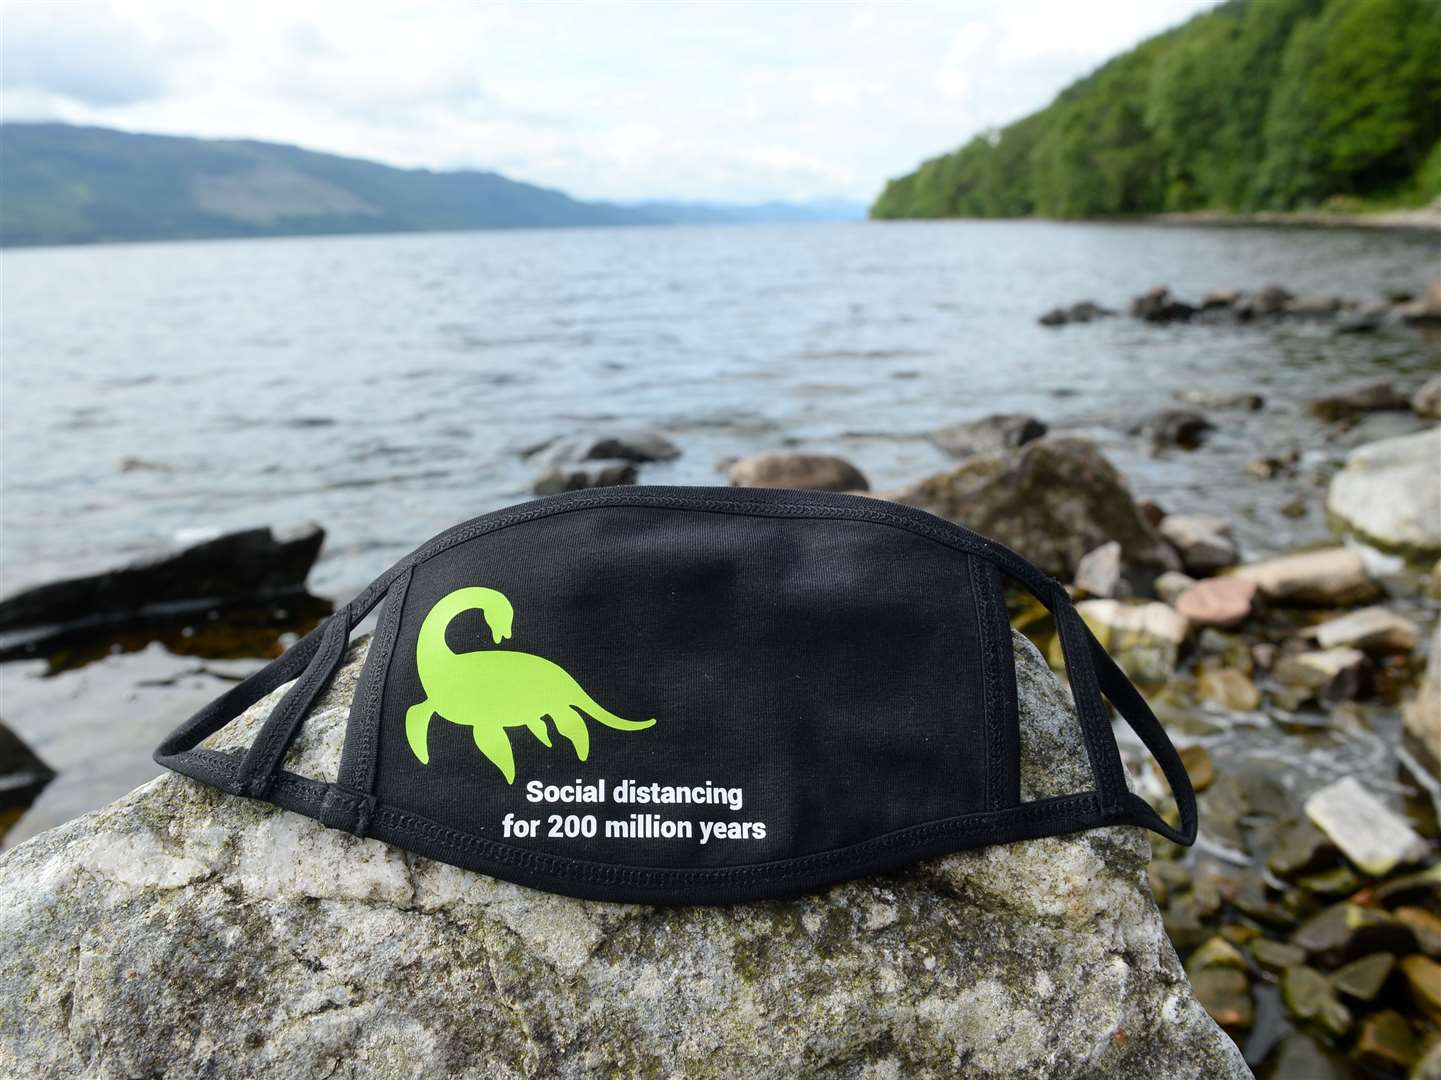 The Nessie face masks are proving popular around the world.